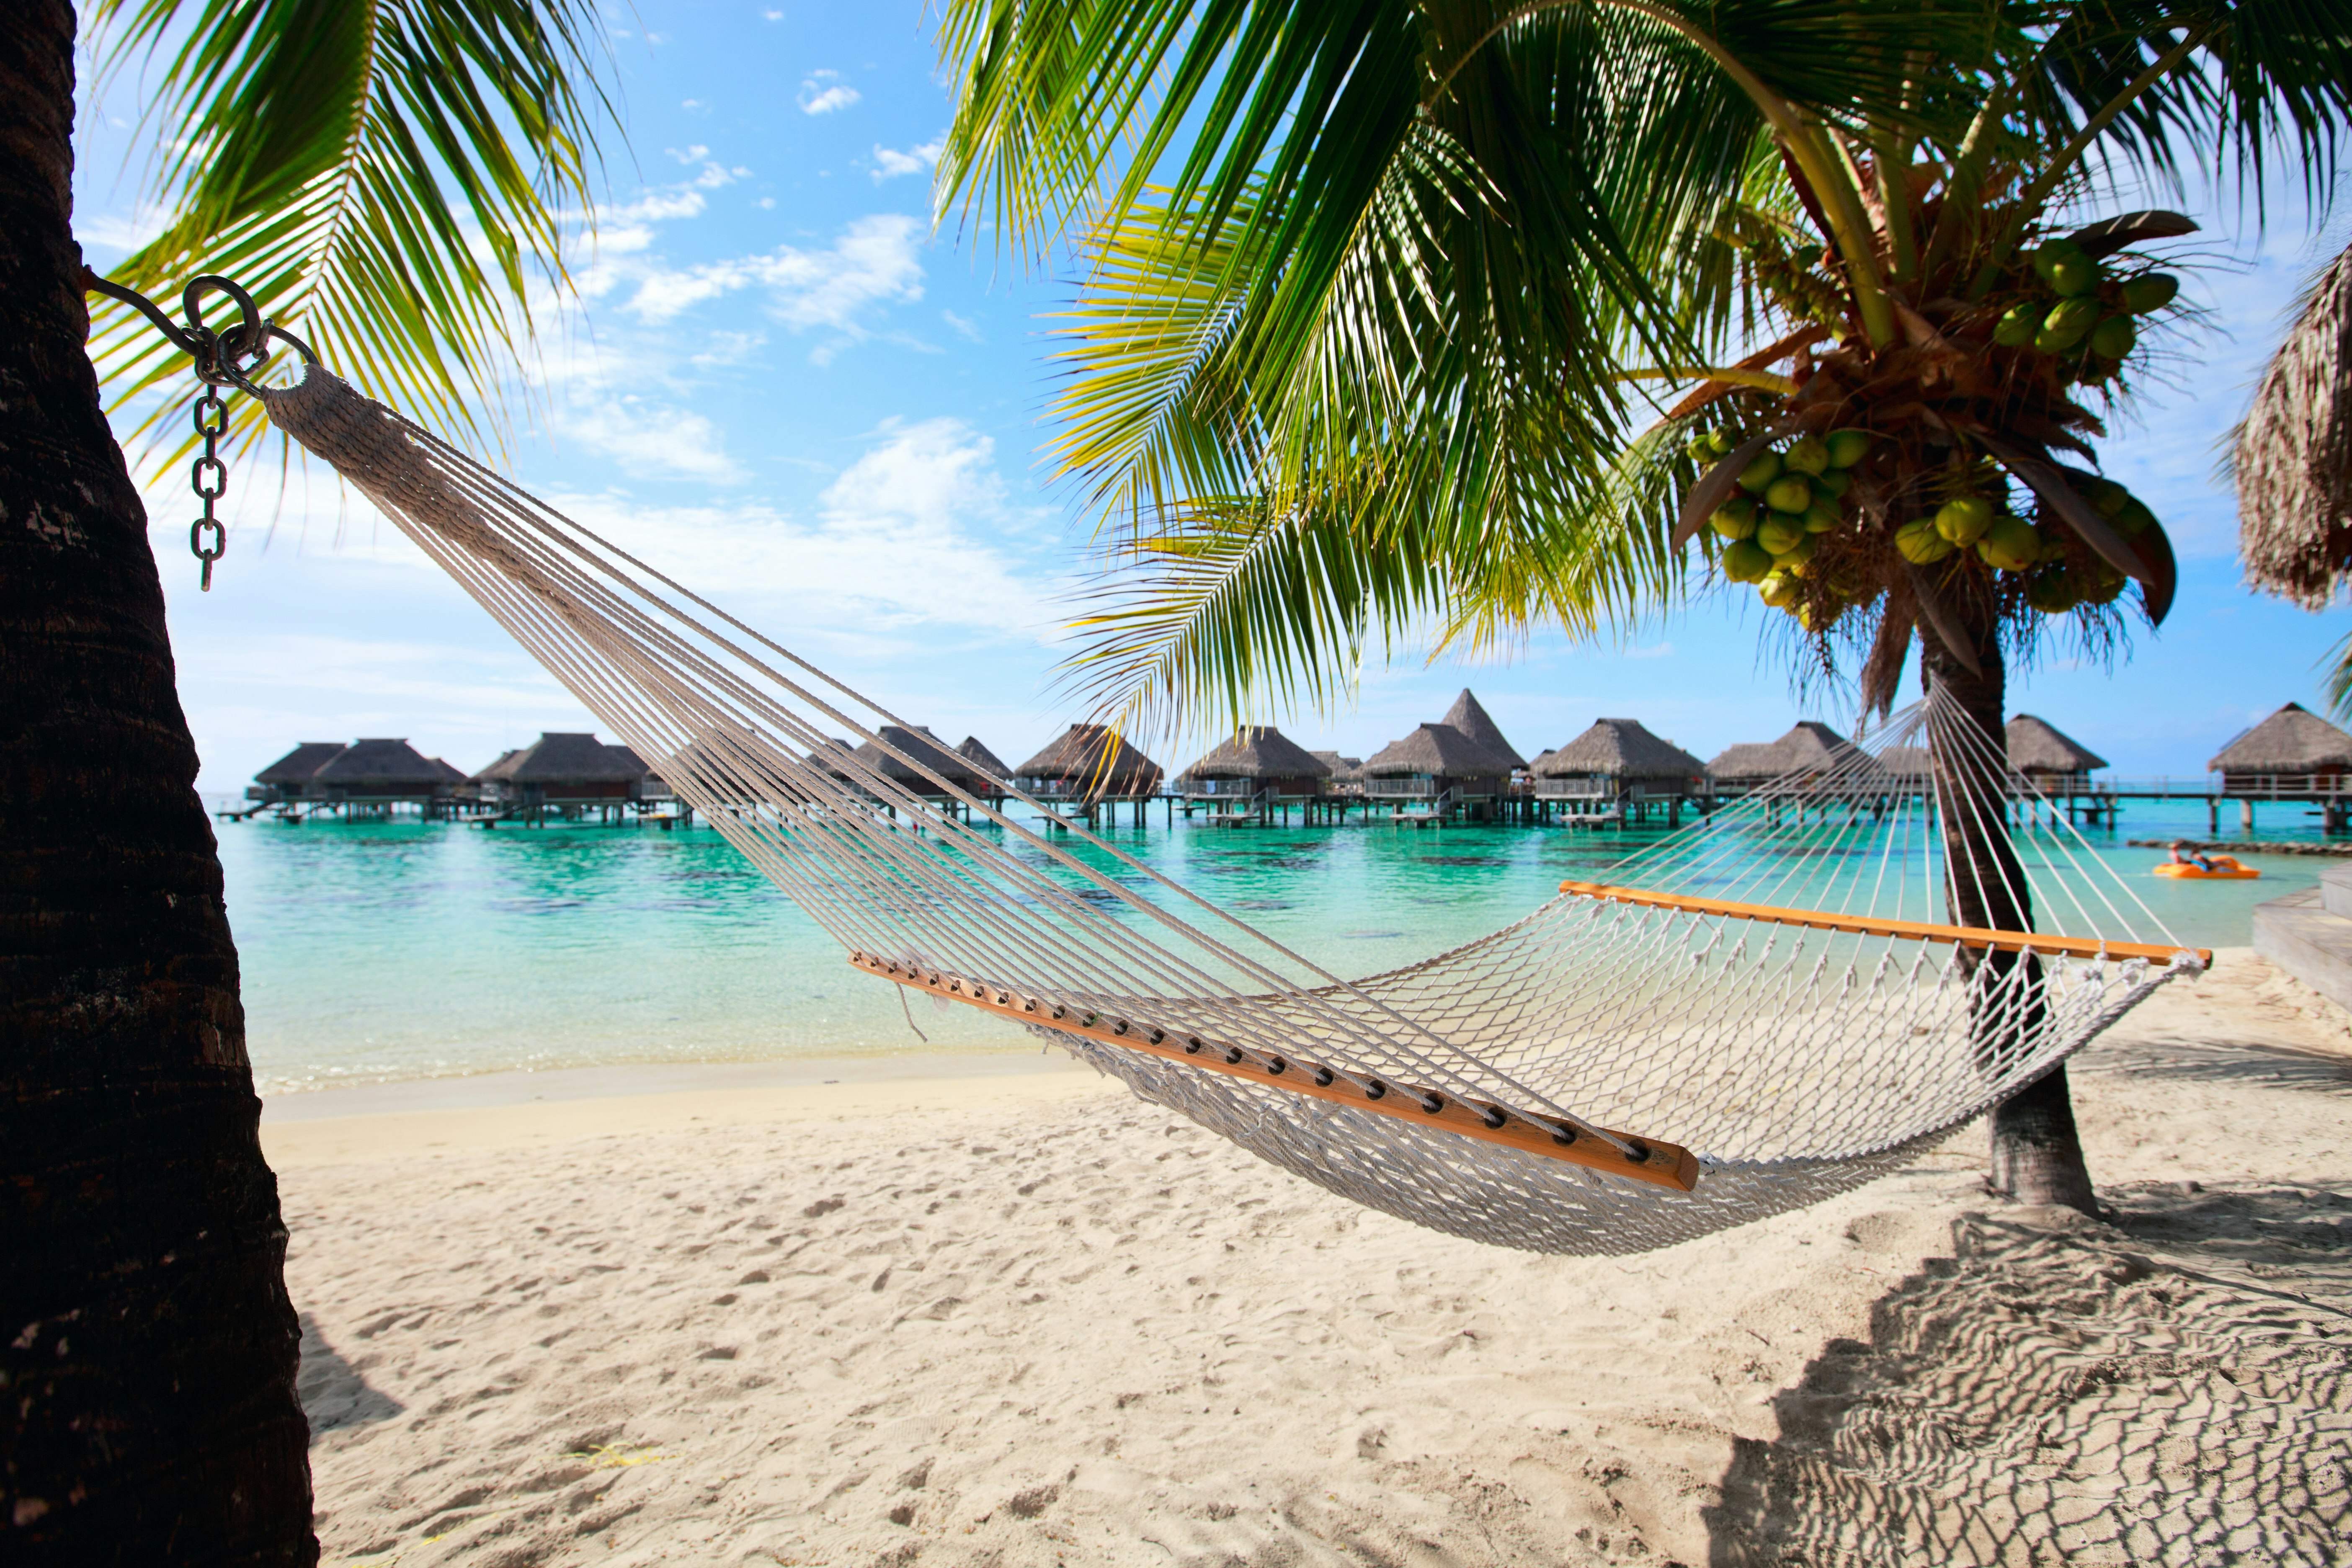 A hammock stretched between two palm trees on a beach in Tahiti